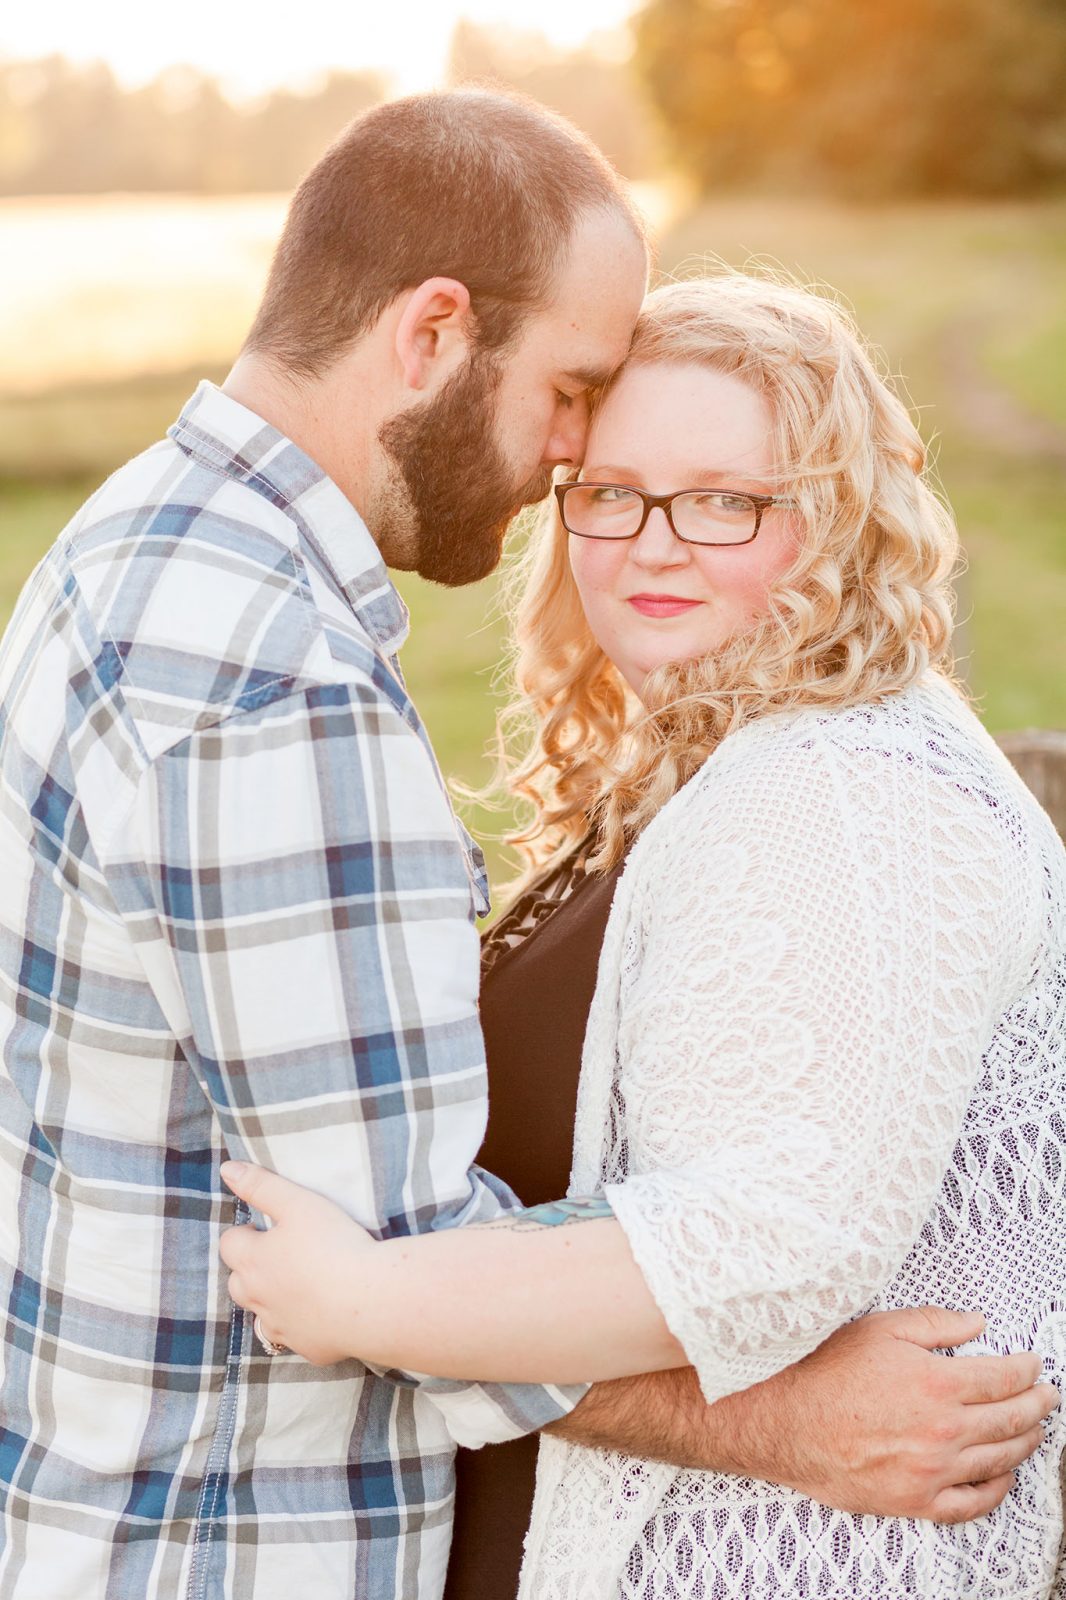 engagement session in a sunset field in hillsboro, oregon - Portland wedding photographer